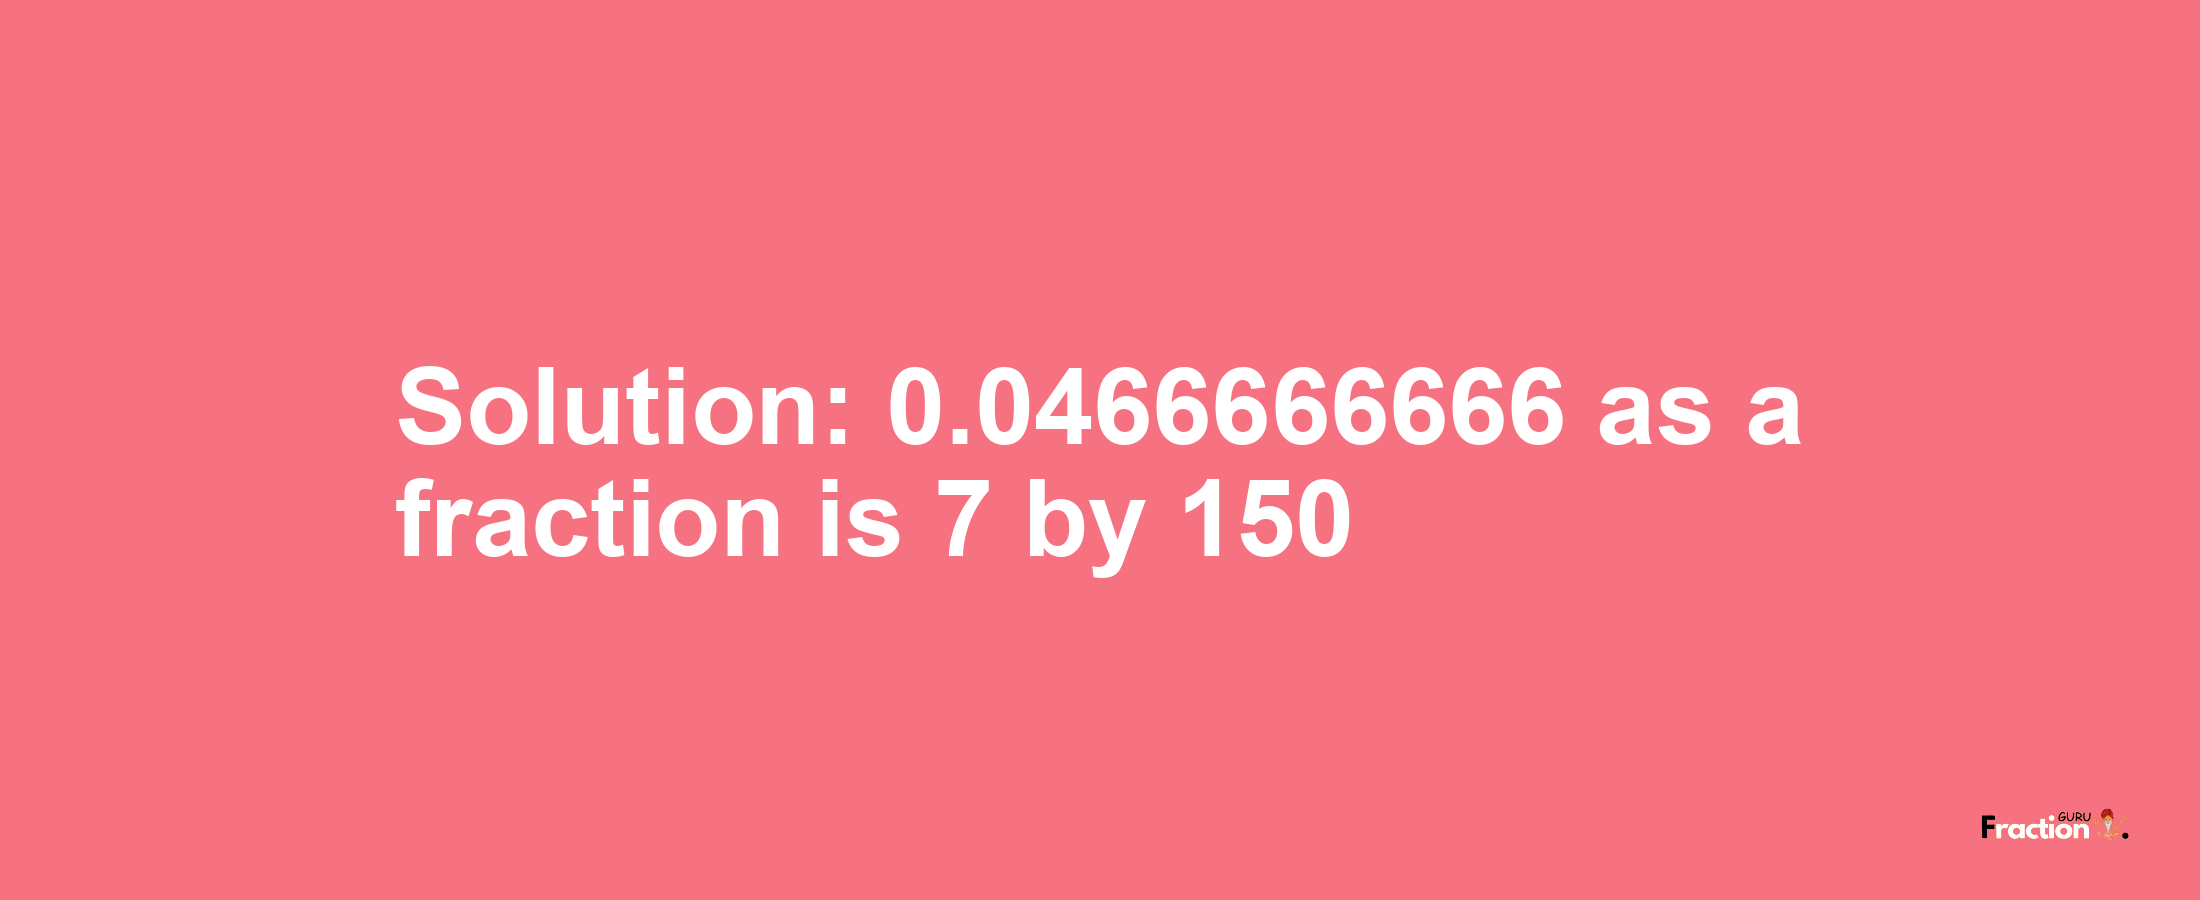 Solution:0.0466666666 as a fraction is 7/150